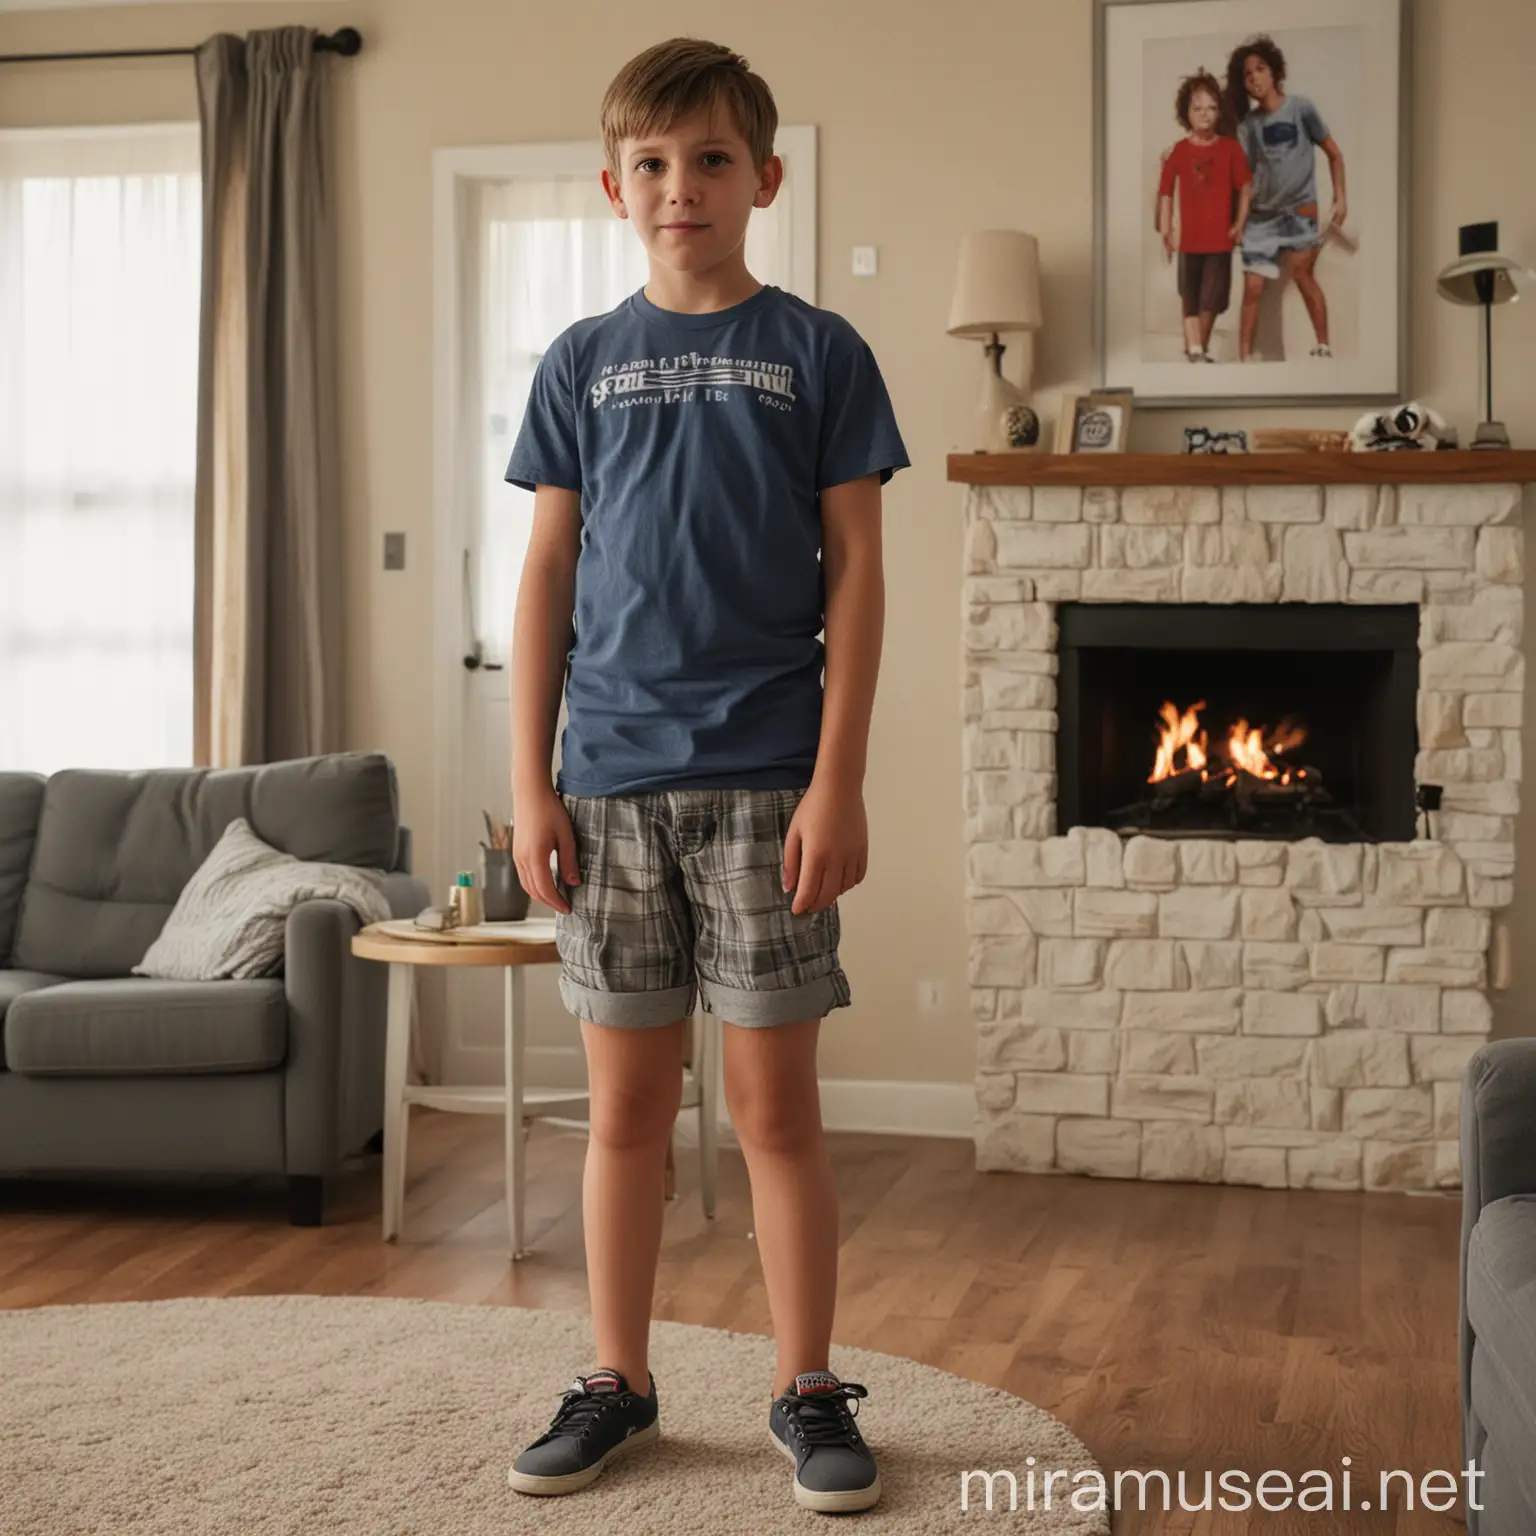 a 10-year-old boy stands in the living room, wearing shorts and a T-shirt